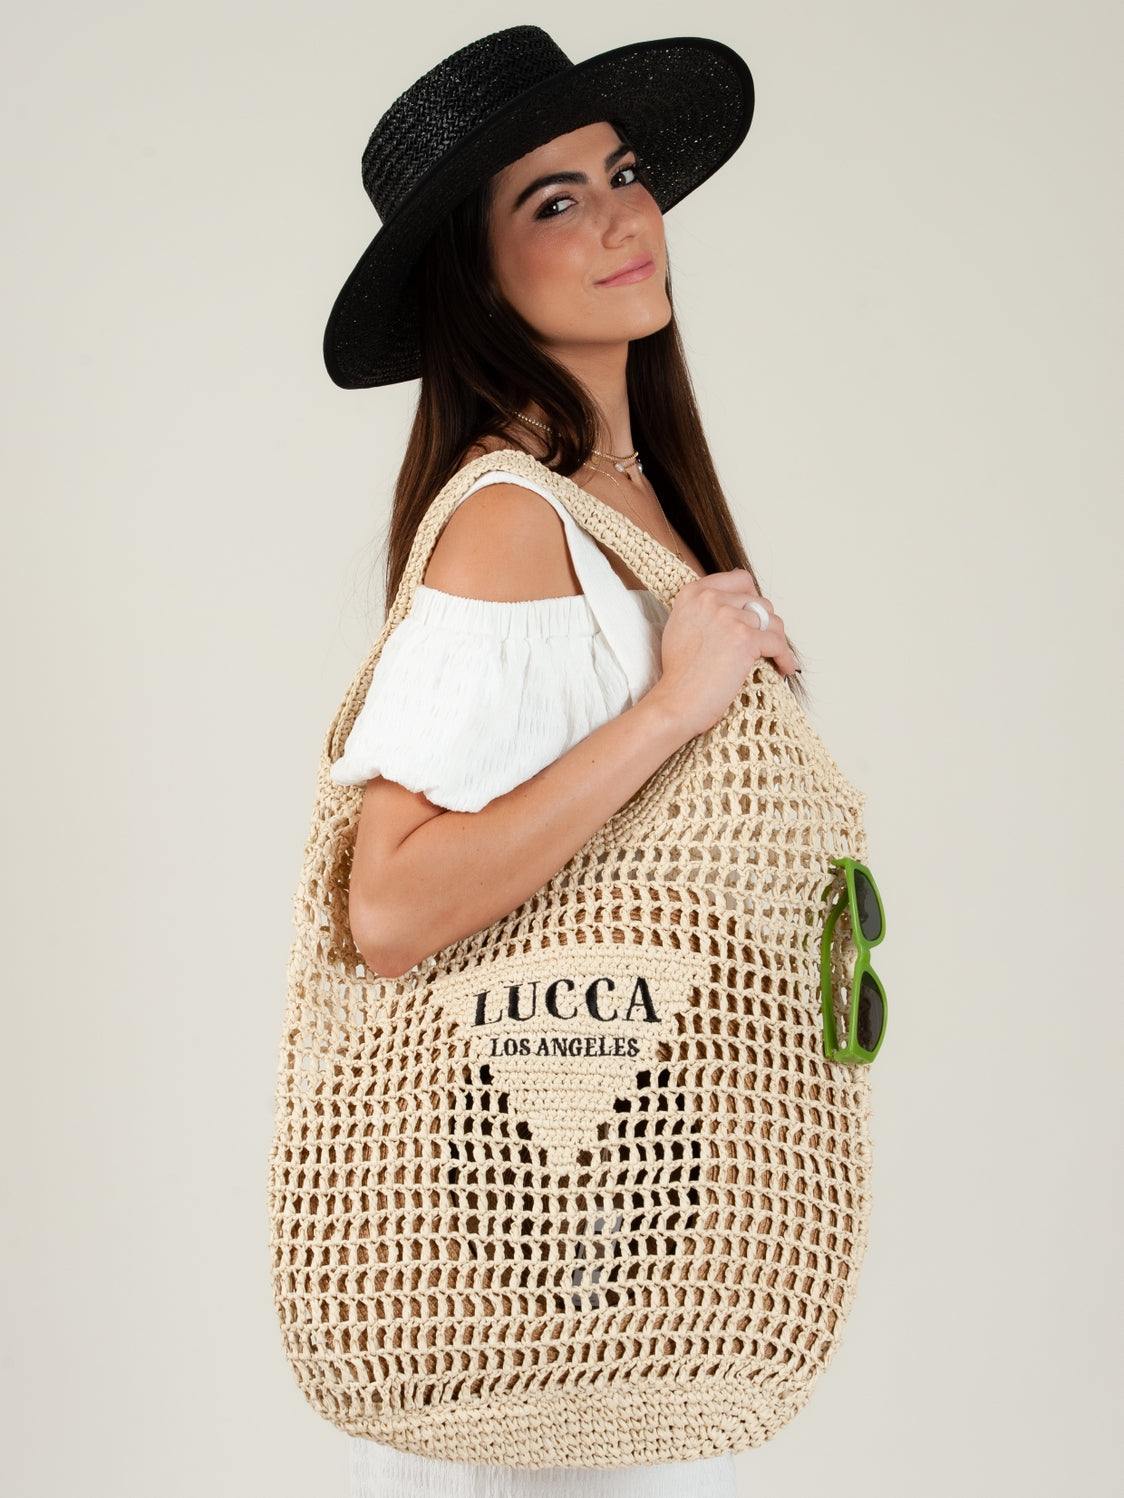 Oversized "Lucca" Straw Tote